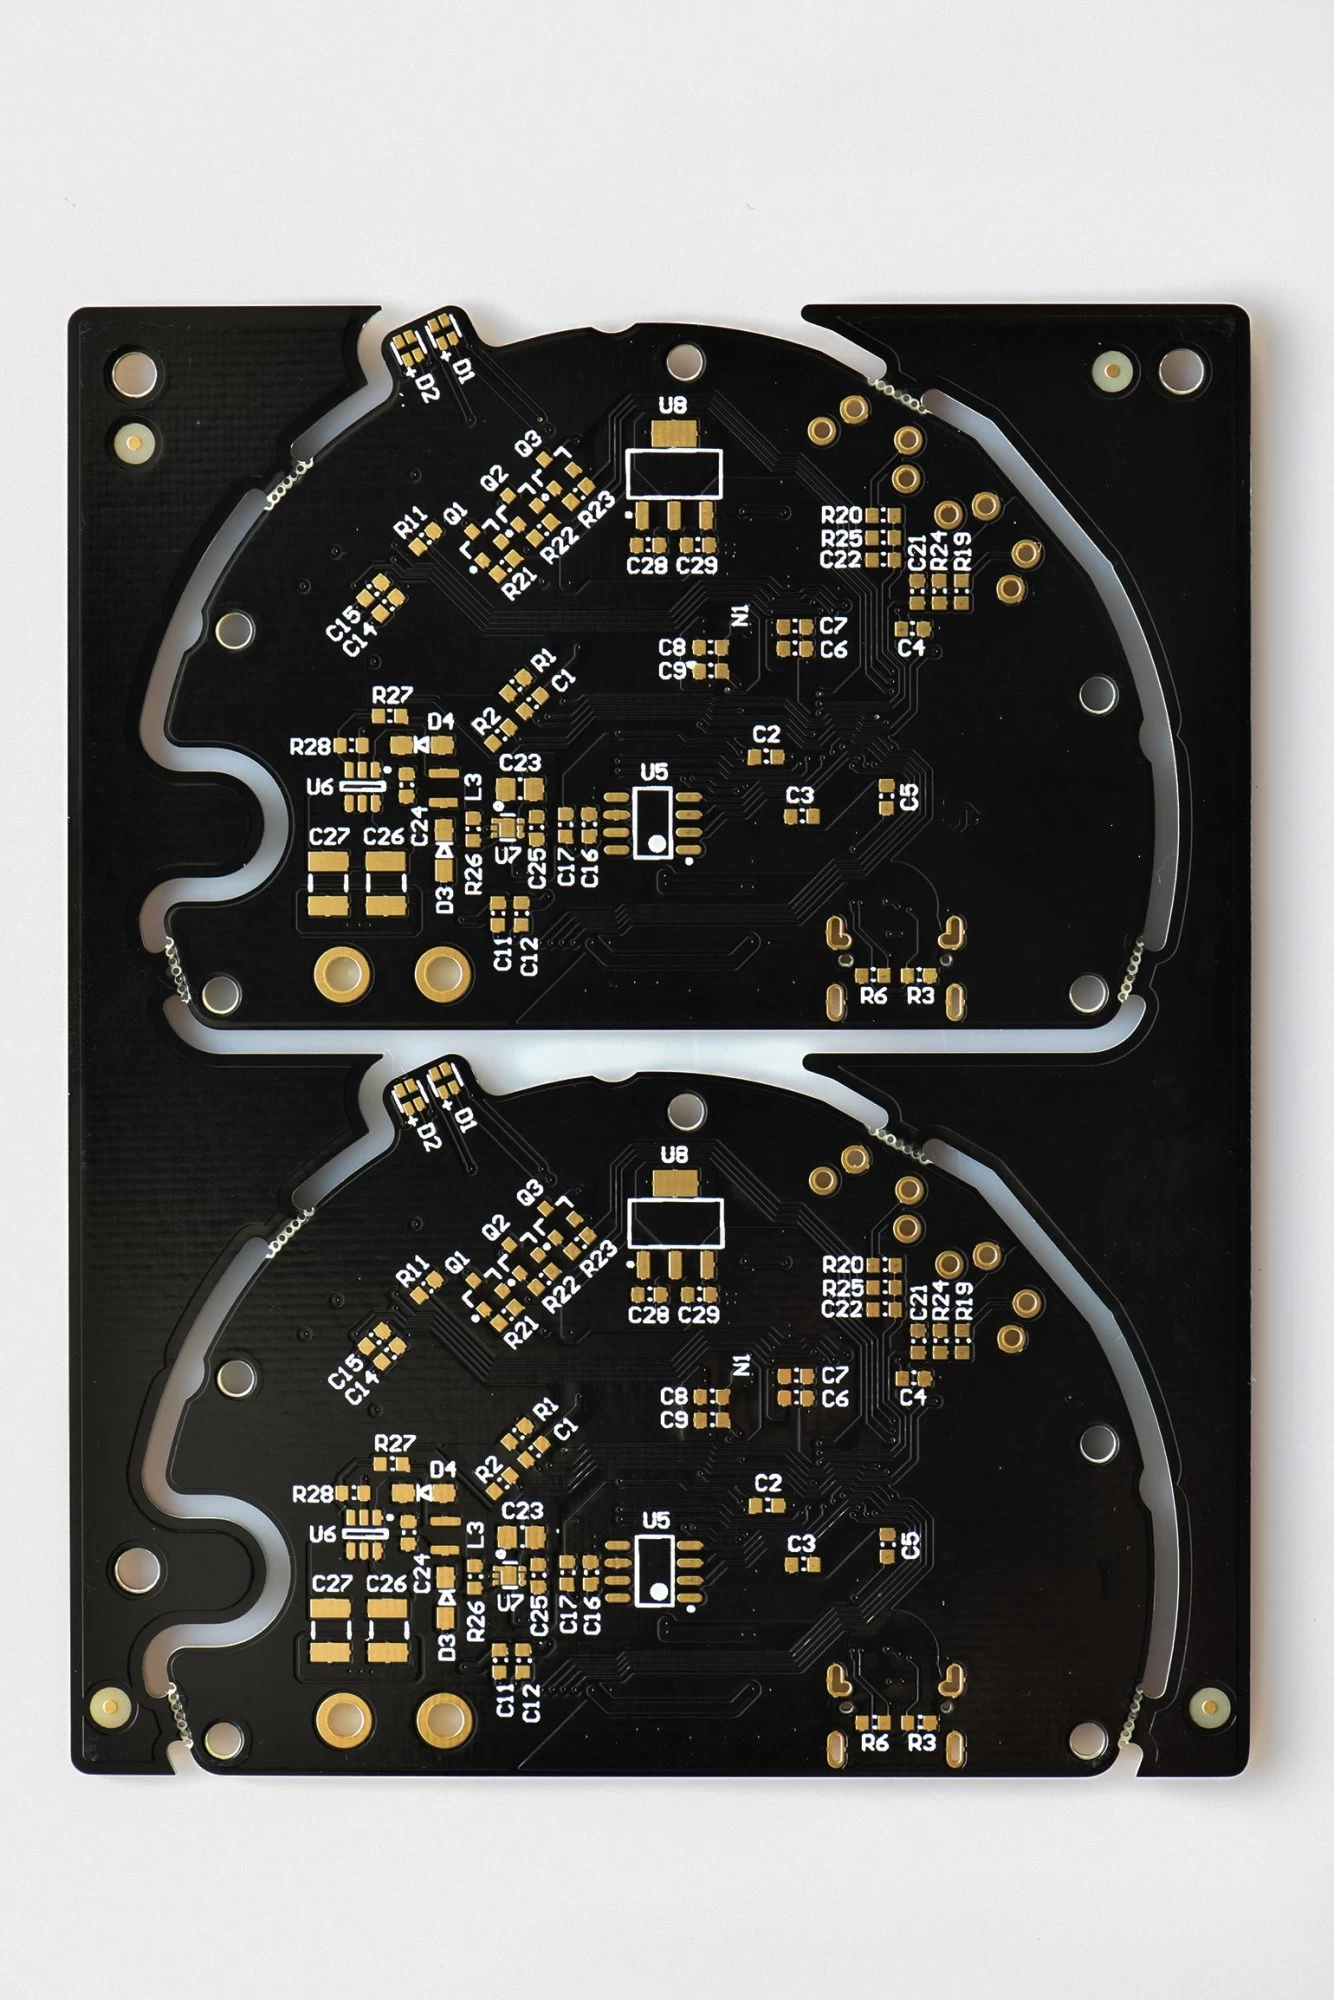 High quality pcb wholesales, Printed circuit board supplier